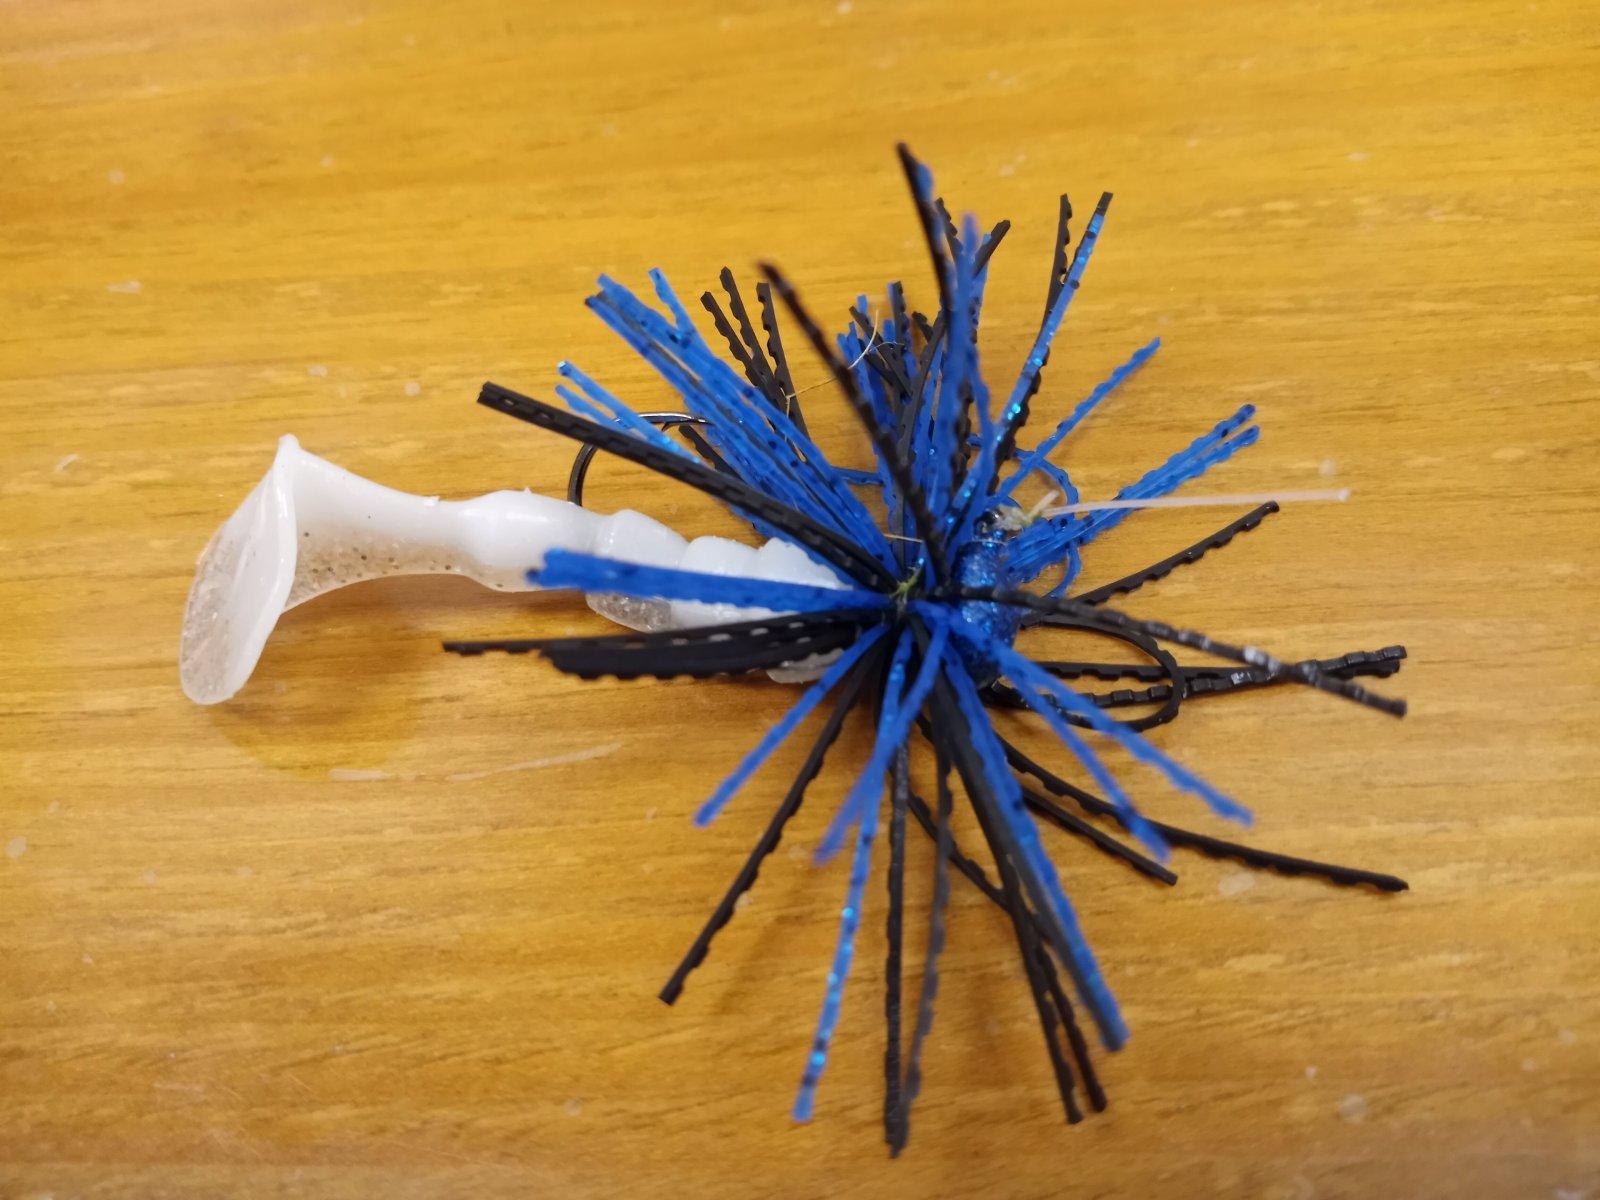 Black and blue pixie jig